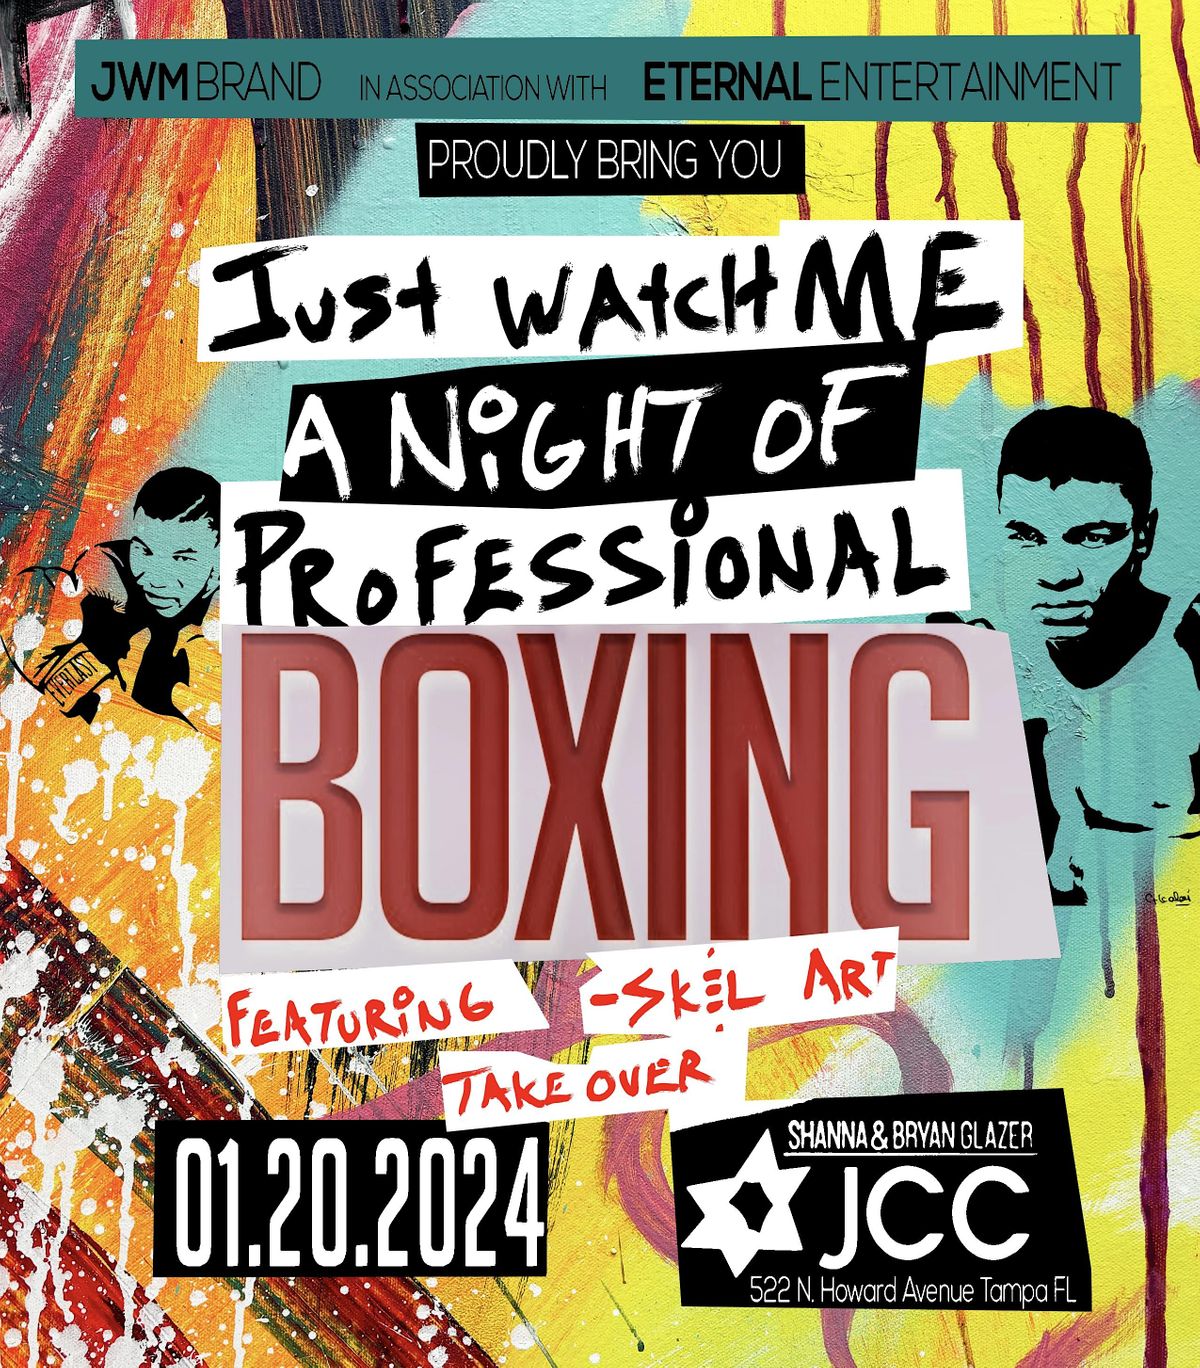 JUST WATCH ME - A NIGHT OF PROFESSIONAL BOXING II